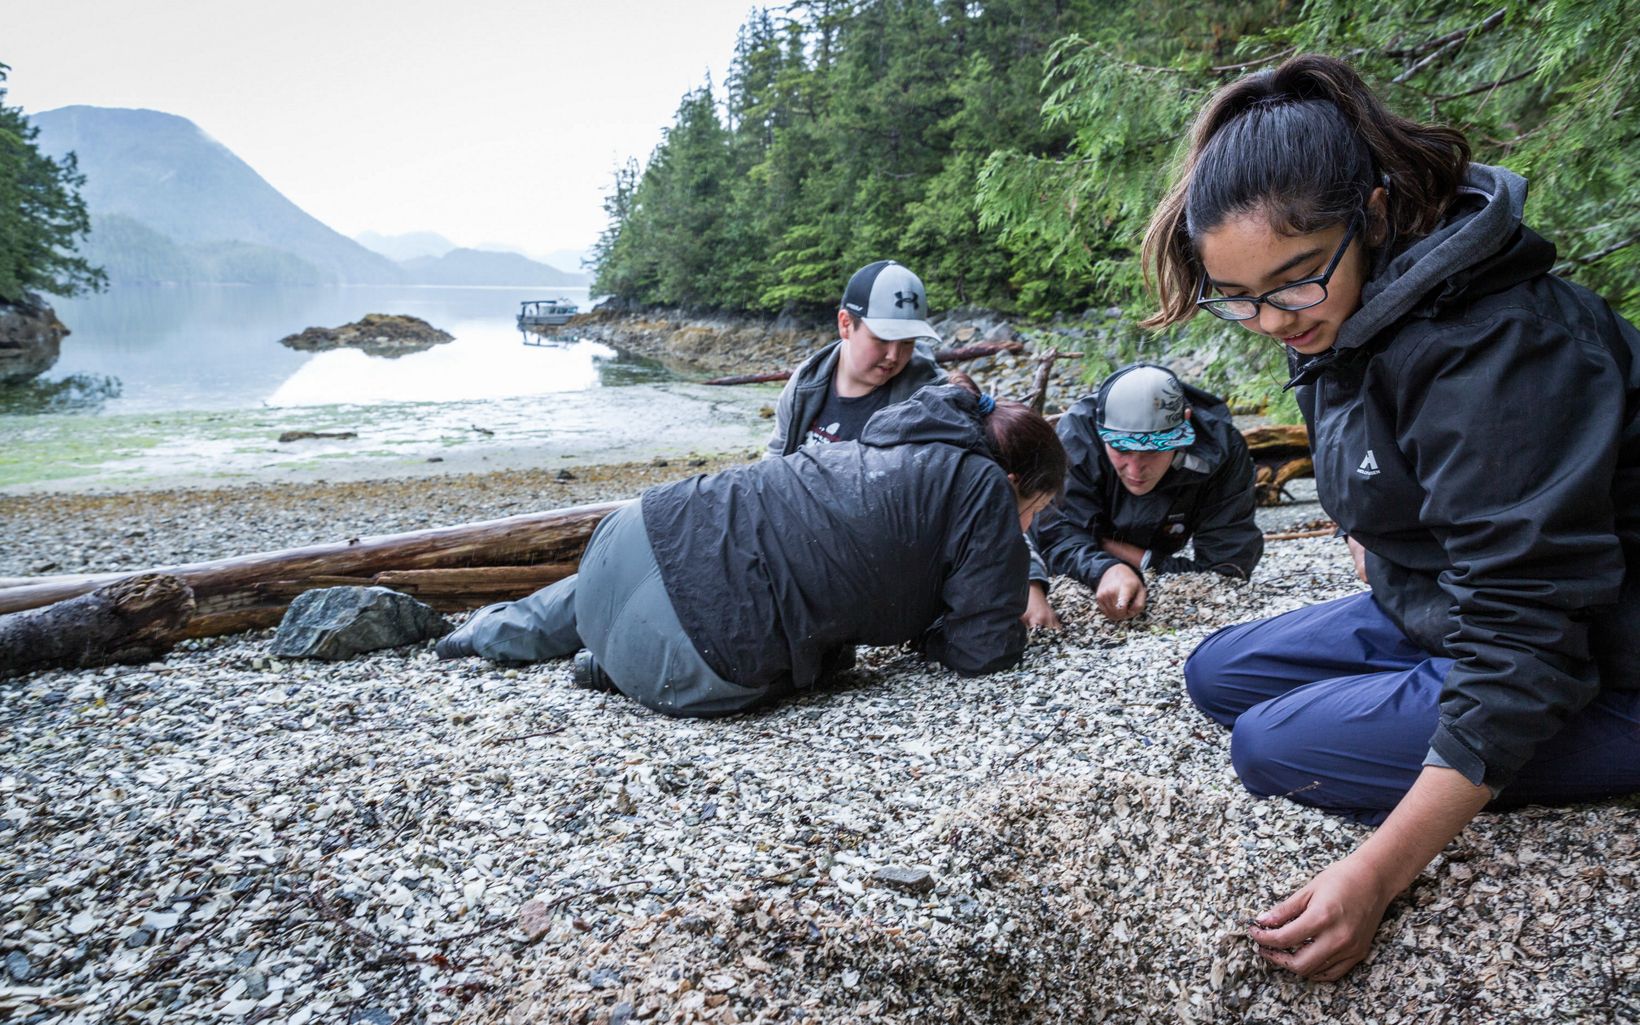 Intergenerational Connections SEAS interns dig through an ancient shell midden site looking for artifacts in the Kitasoo/Xai'xais Nation of the Great Bear Rainforest. © Jason Houston